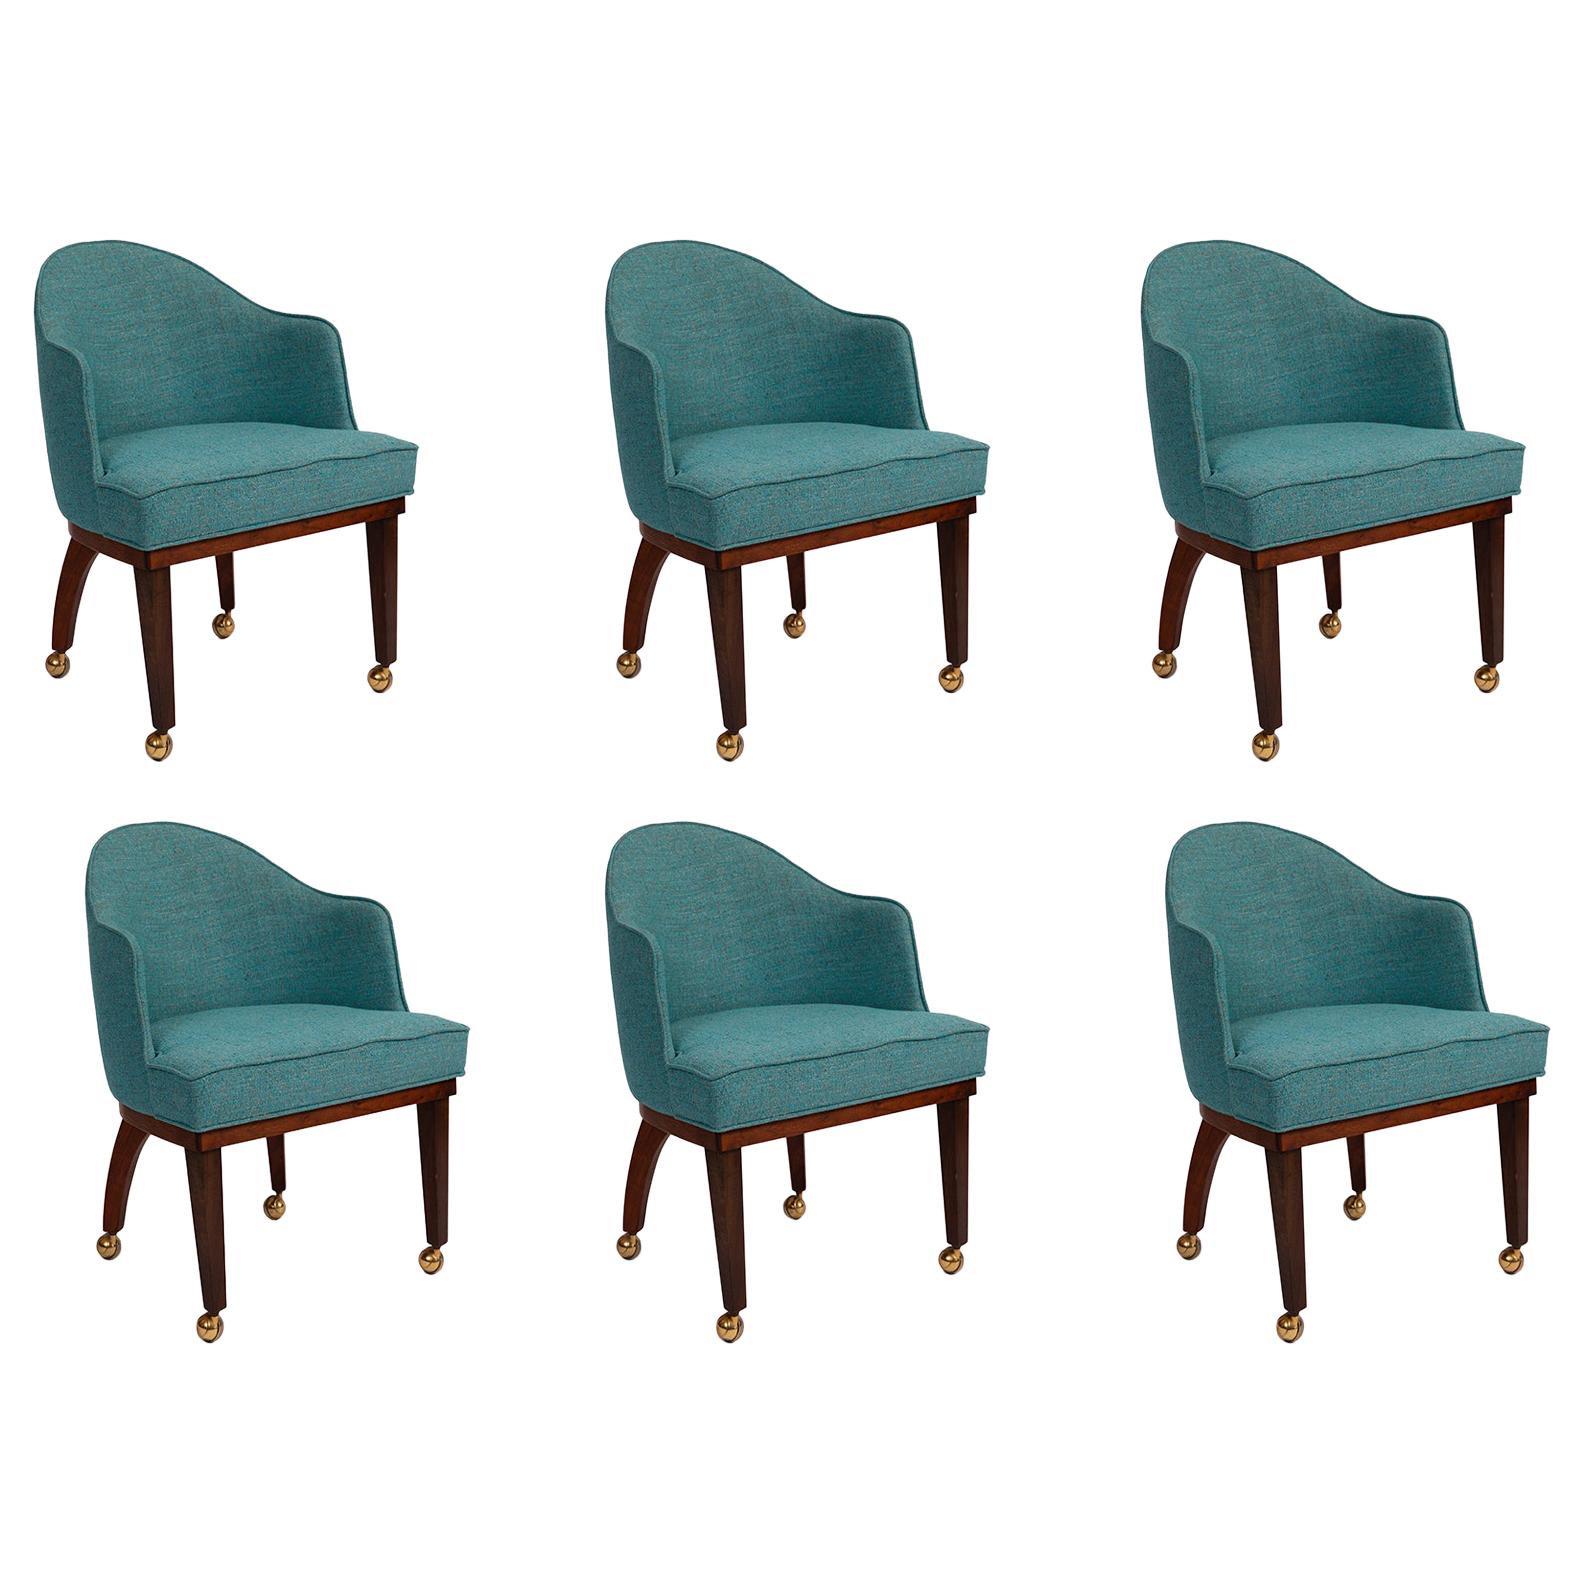 6 Chet Beardsley Walnut and Upholstered Dining Chairs